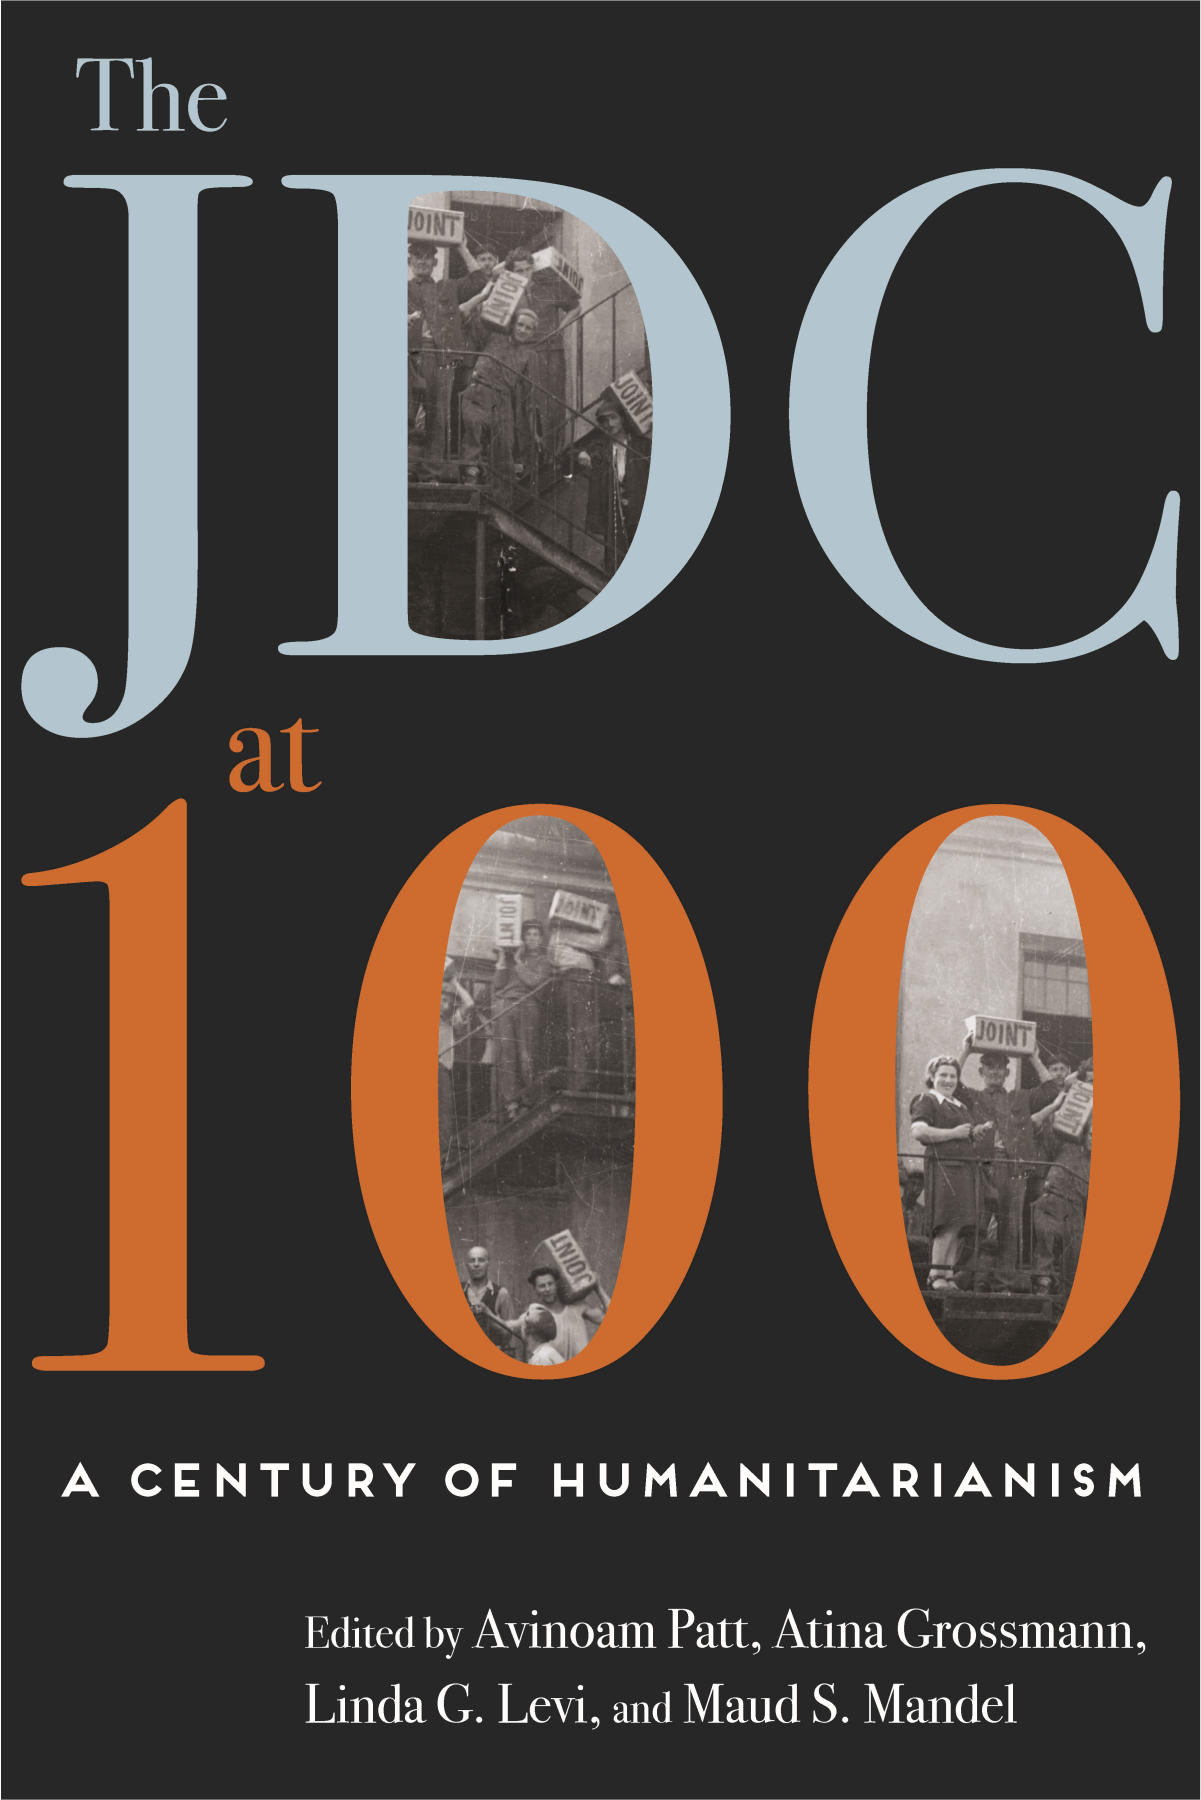 This image is the cover for the book Jdc at 100